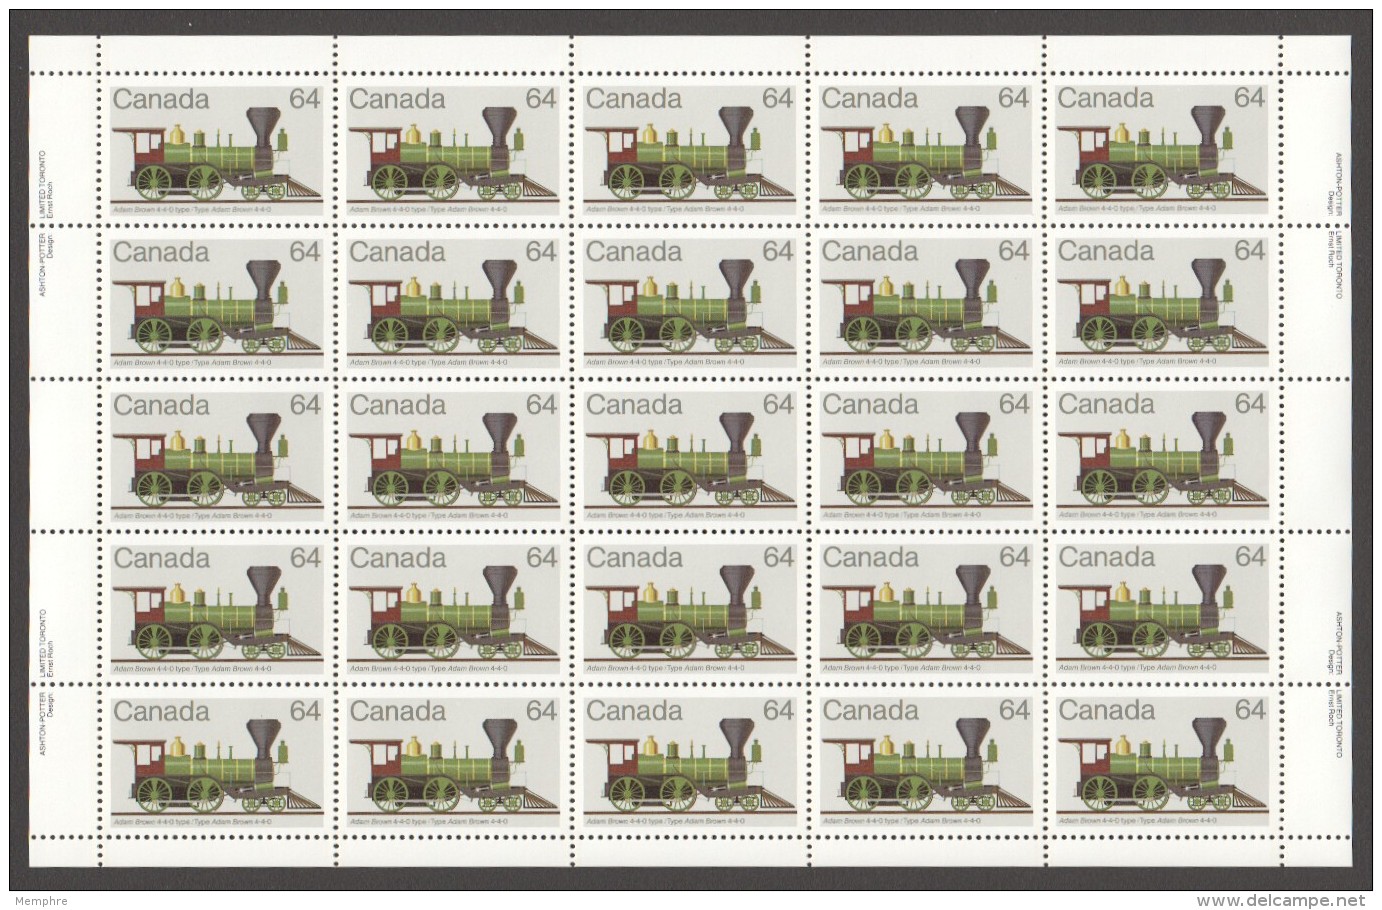 1983  Canadian Locomotives Series 1 - Sc 999-1002  3  MNH Complete Sheets Of 25 - Fogli Completi